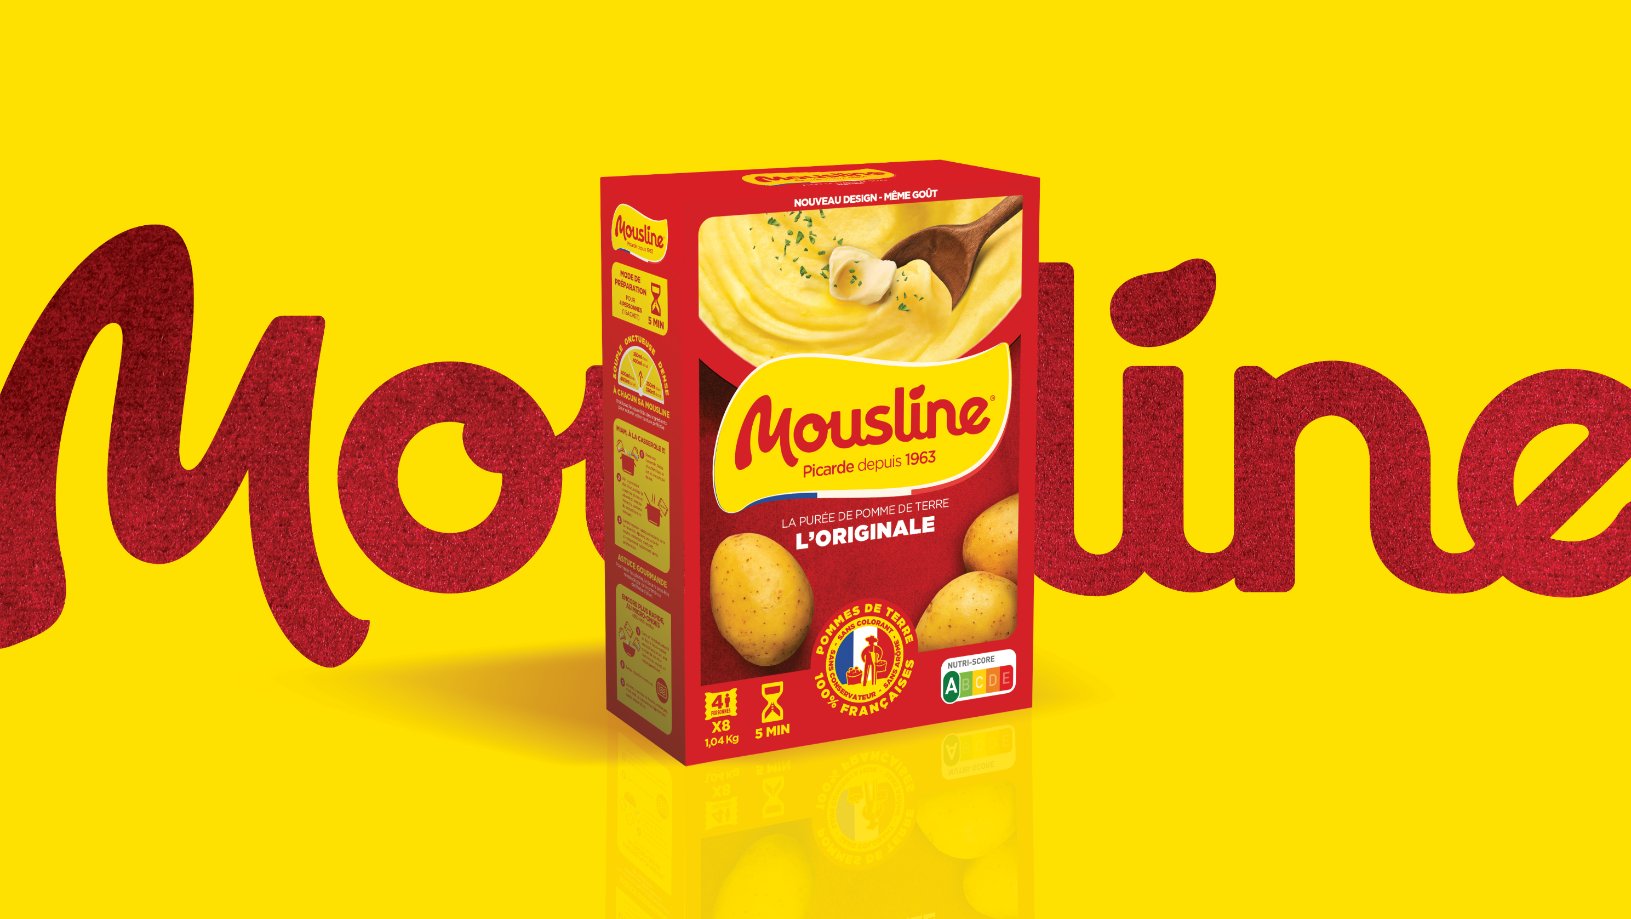 Mousline Puts the “i” in Potato with Their Charmingly Modern New Look